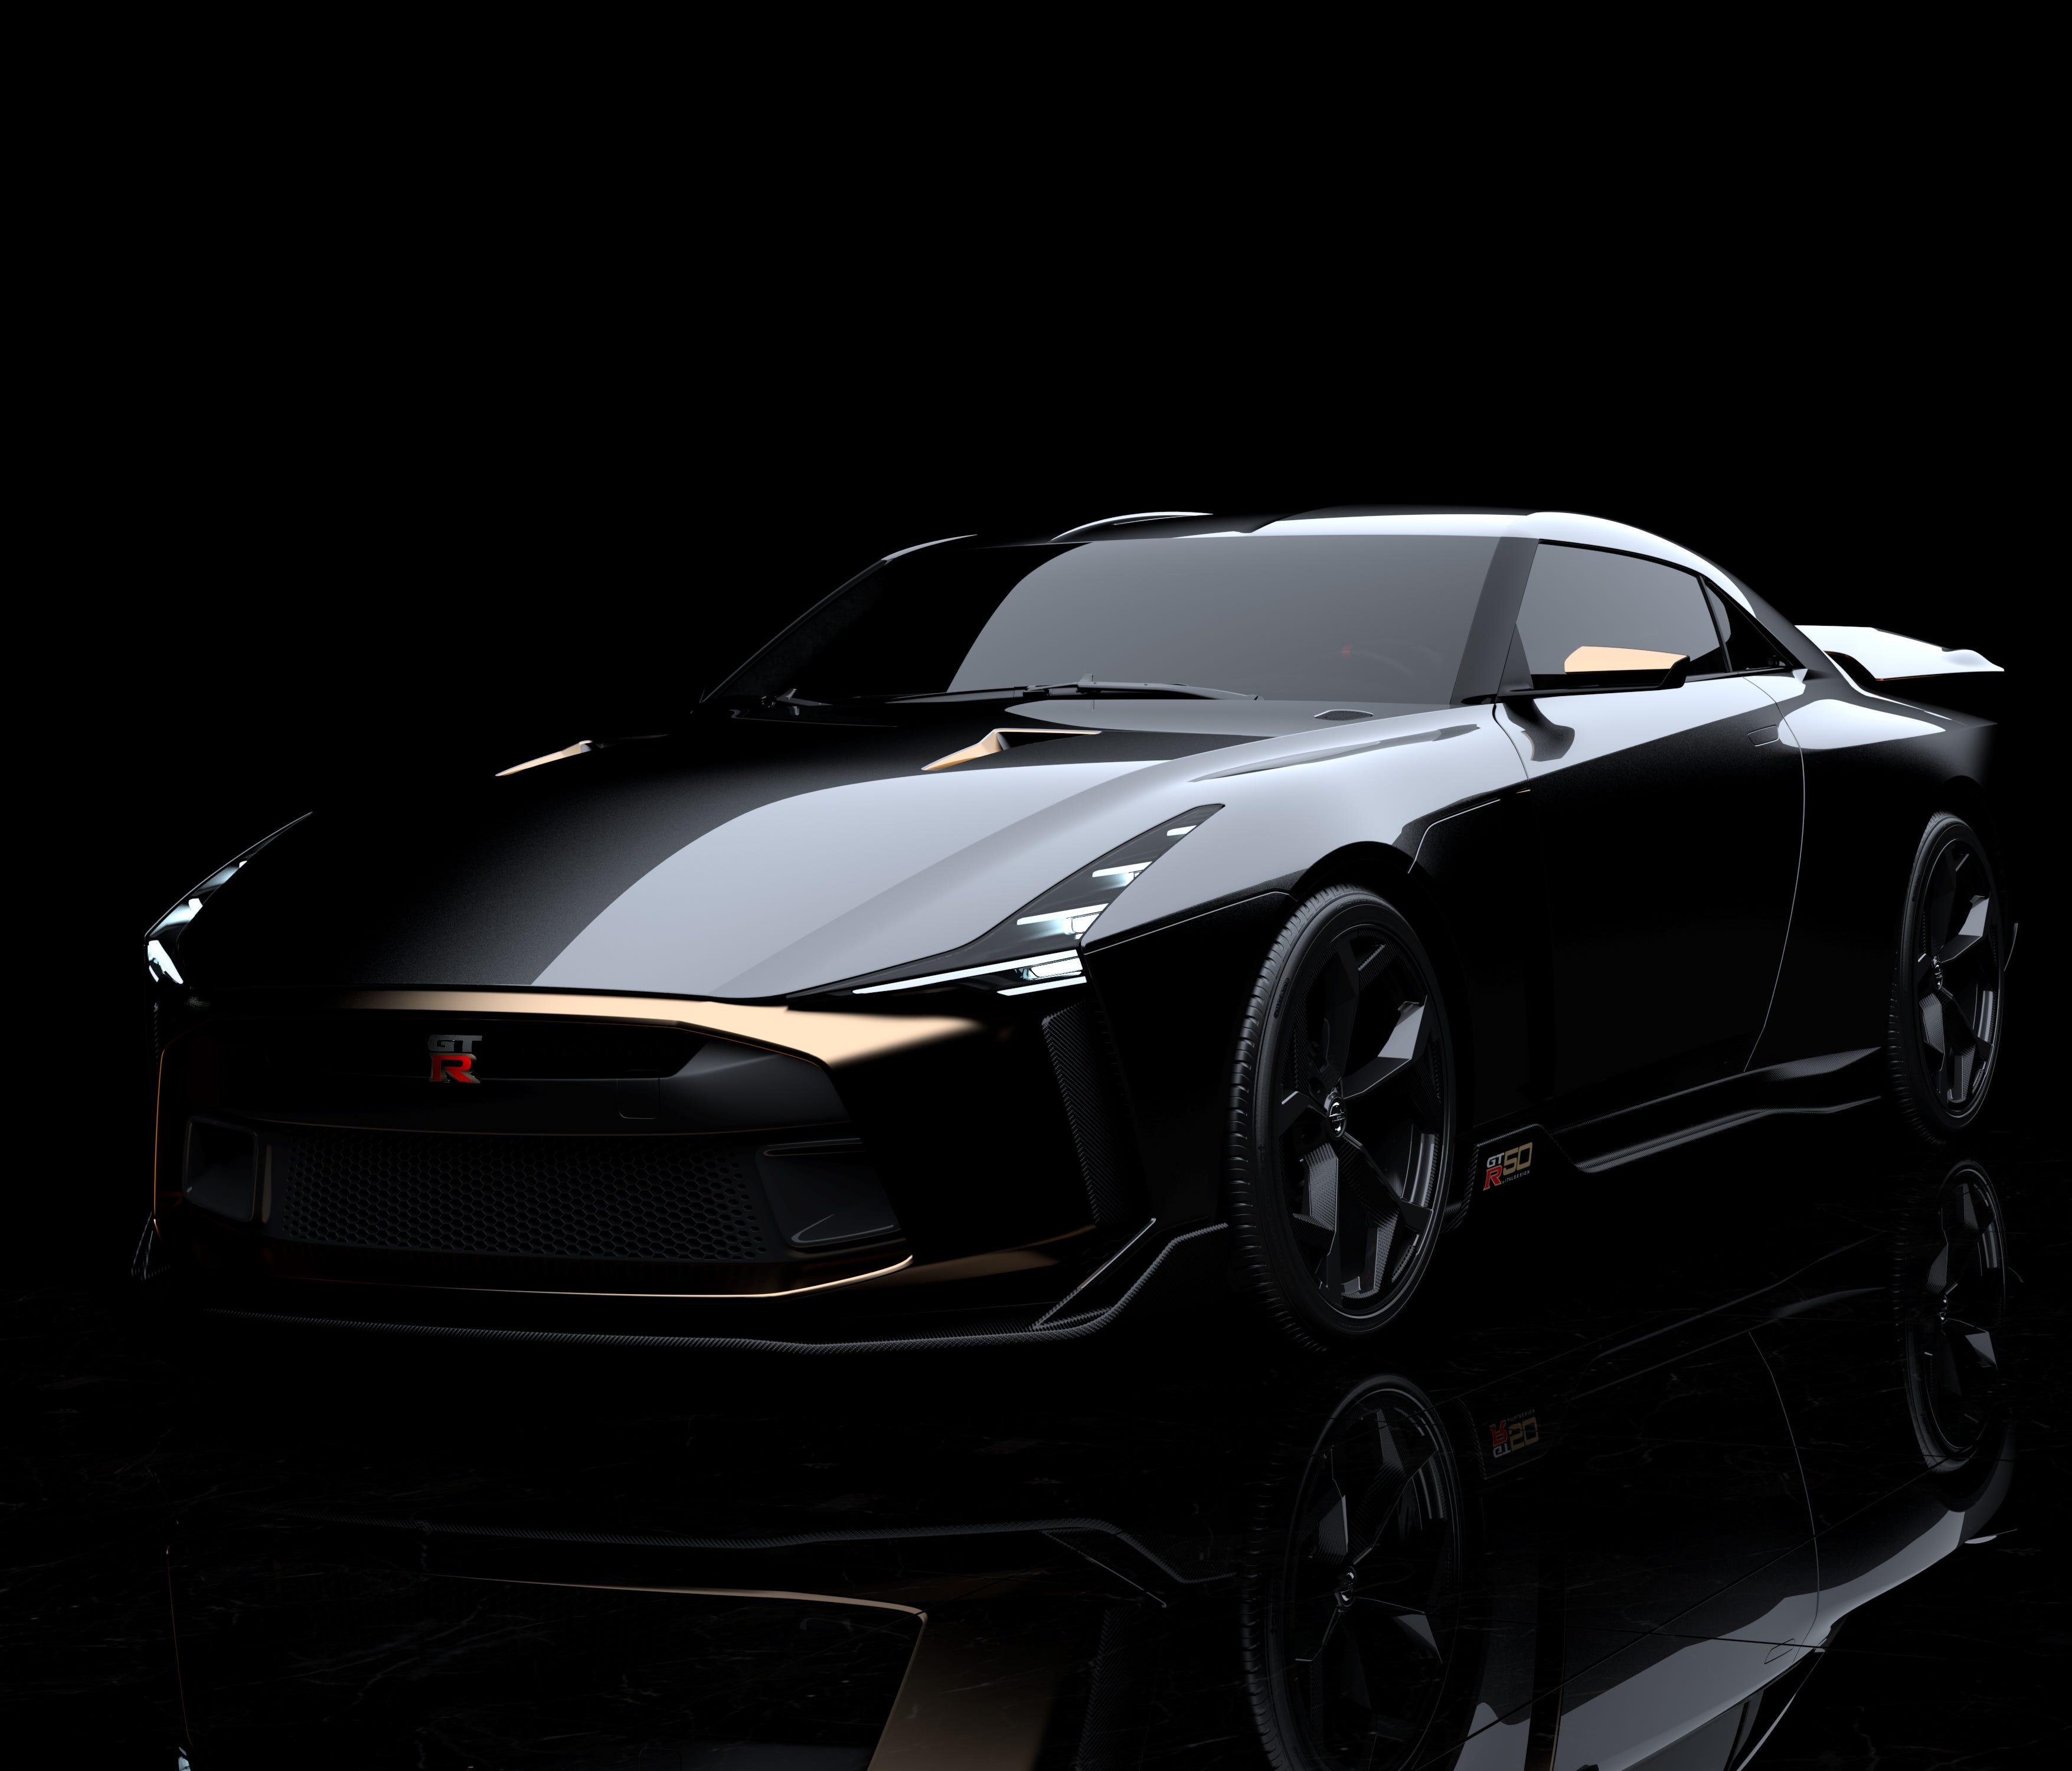 Based on a production 2018 Nissan GT-R NISMO model, the Nissan GT-R50 by Italdesign